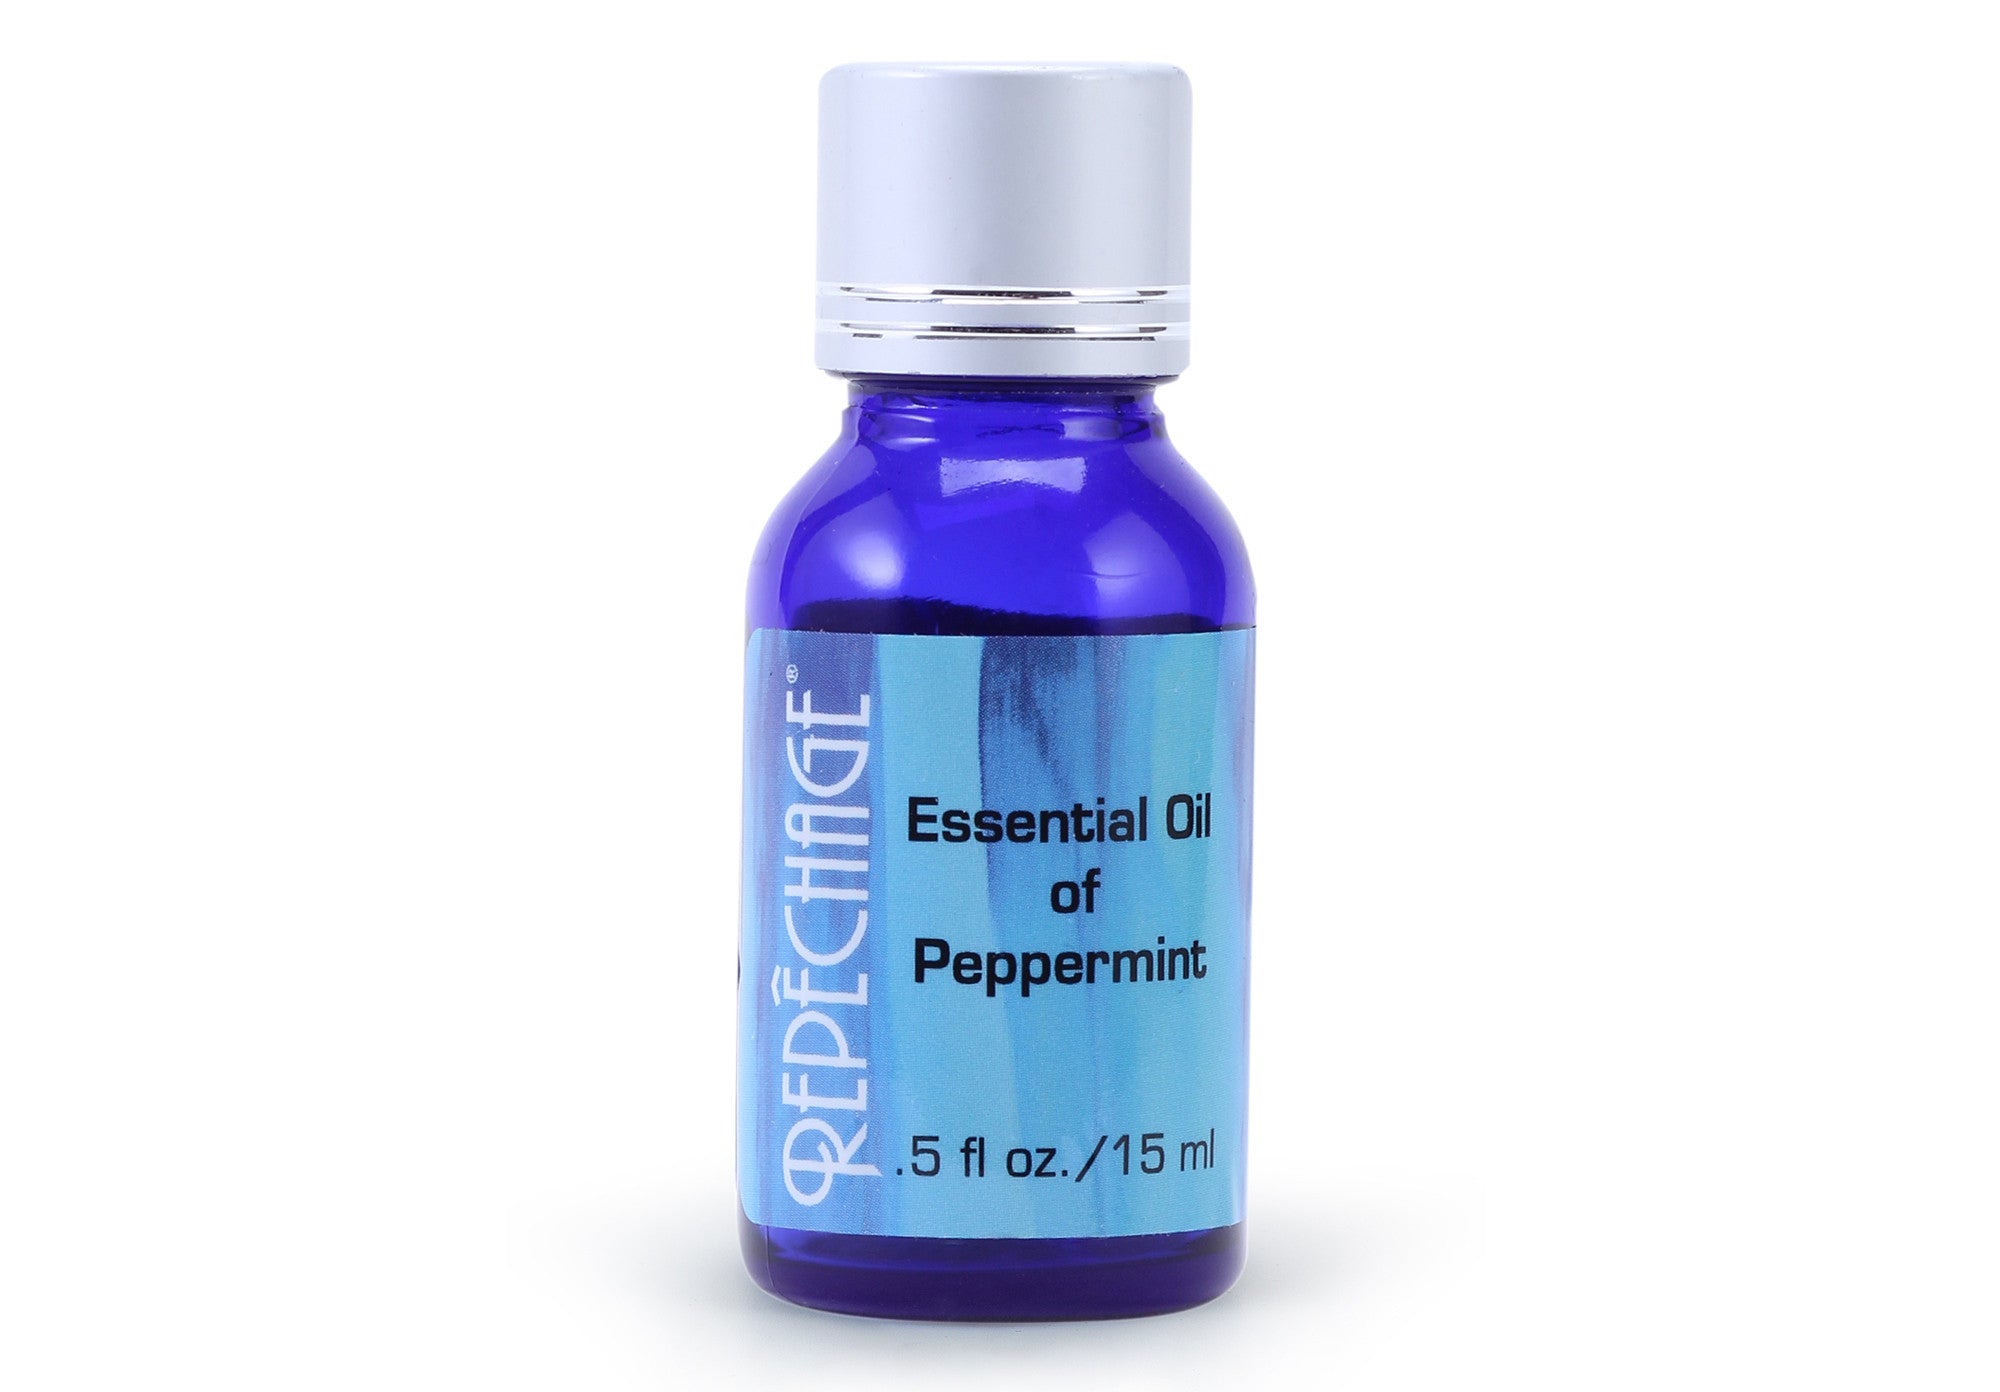 Essential Oil of Peppermint